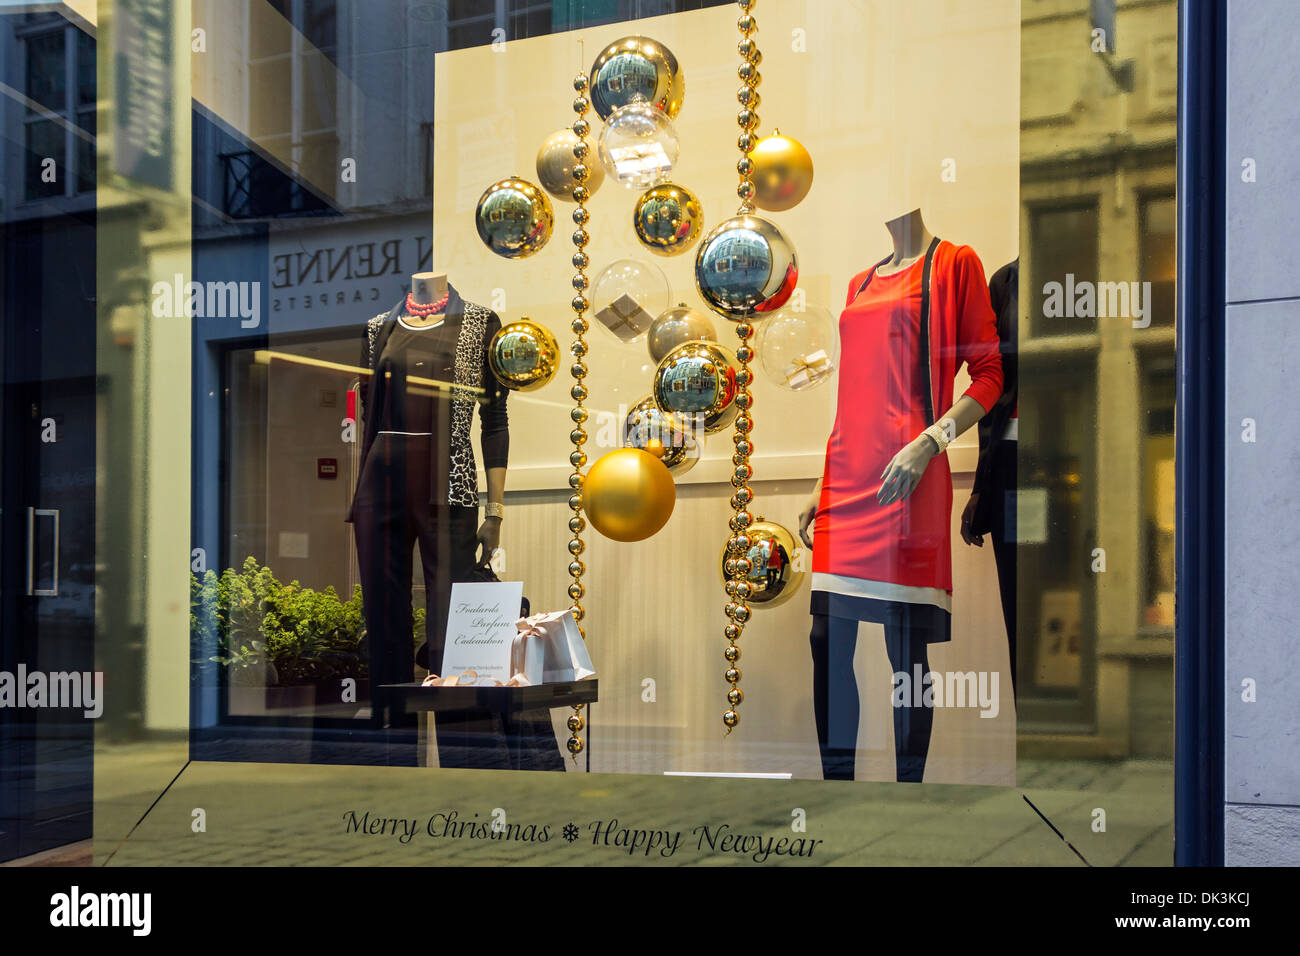 Christmas decorations in shopwindow of clothes store showing festive